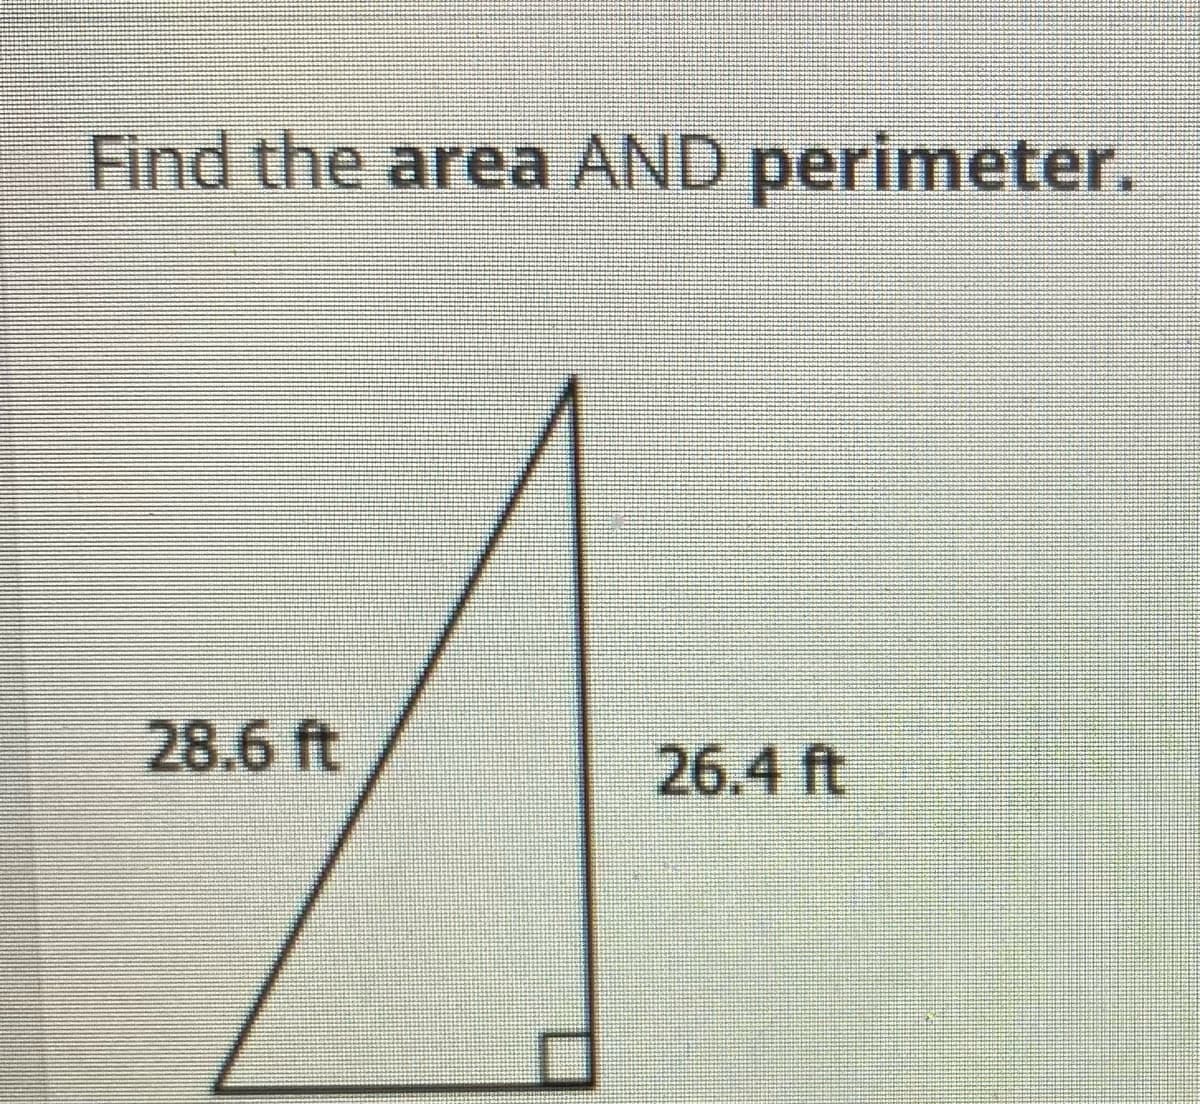 ### Geometry: Finding the Area and Perimeter of a Right Triangle

#### Problem Statement:

**Find the area AND perimeter.**

![Right Triangle]

#### Given:
- Length of one leg: 28.6 ft
- Length of the other leg: 26.4 ft

#### Diagram:
The diagram shows a right triangle with the two given legs forming the right angle.

### Steps to Solve:

#### Step 1: Calculate the Area

For a right triangle, the area can be found using the formula:
\[ \text{Area} = \frac{1}{2} \times \text{base} \times \text{height} \]

Here, the base is 28.6 ft and the height is 26.4 ft.

So,
\[ \text{Area} = \frac{1}{2} \times 28.6 \, \text{ft} \times 26.4 \, \text{ft} \]
\[ \text{Area} = \frac{1}{2} \times 754.24 \, \text{ft}^2 \]
\[ \text{Area} = 377.12 \, \text{ft}^2 \]

#### Step 2: Calculate the Hypotenuse

The hypotenuse of a right triangle can be found using the Pythagorean theorem:
\[ \text{Hypotenuse} = \sqrt{(\text{base})^2 + (\text{height})^2} \]

So,
\[ \text{Hypotenuse} = \sqrt{(28.6 \, \text{ft})^2 + (26.4 \, \text{ft})^2} \]
\[ \text{Hypotenuse} = \sqrt{817.96 + 696.96} \]
\[ \text{Hypotenuse} = \sqrt{1514.92} \]
\[ \text{Hypotenuse} \approx 38.92 \, \text{ft} \]

#### Step 3: Calculate the Perimeter

The perimeter of the triangle is the sum of all its sides:
\[ \text{Perimeter} = \text{base} + \text{height} + \text{hypotenuse} \]
\[ \text{Perimeter} = 28.6 \, \text{ft} + 26.4 \, \